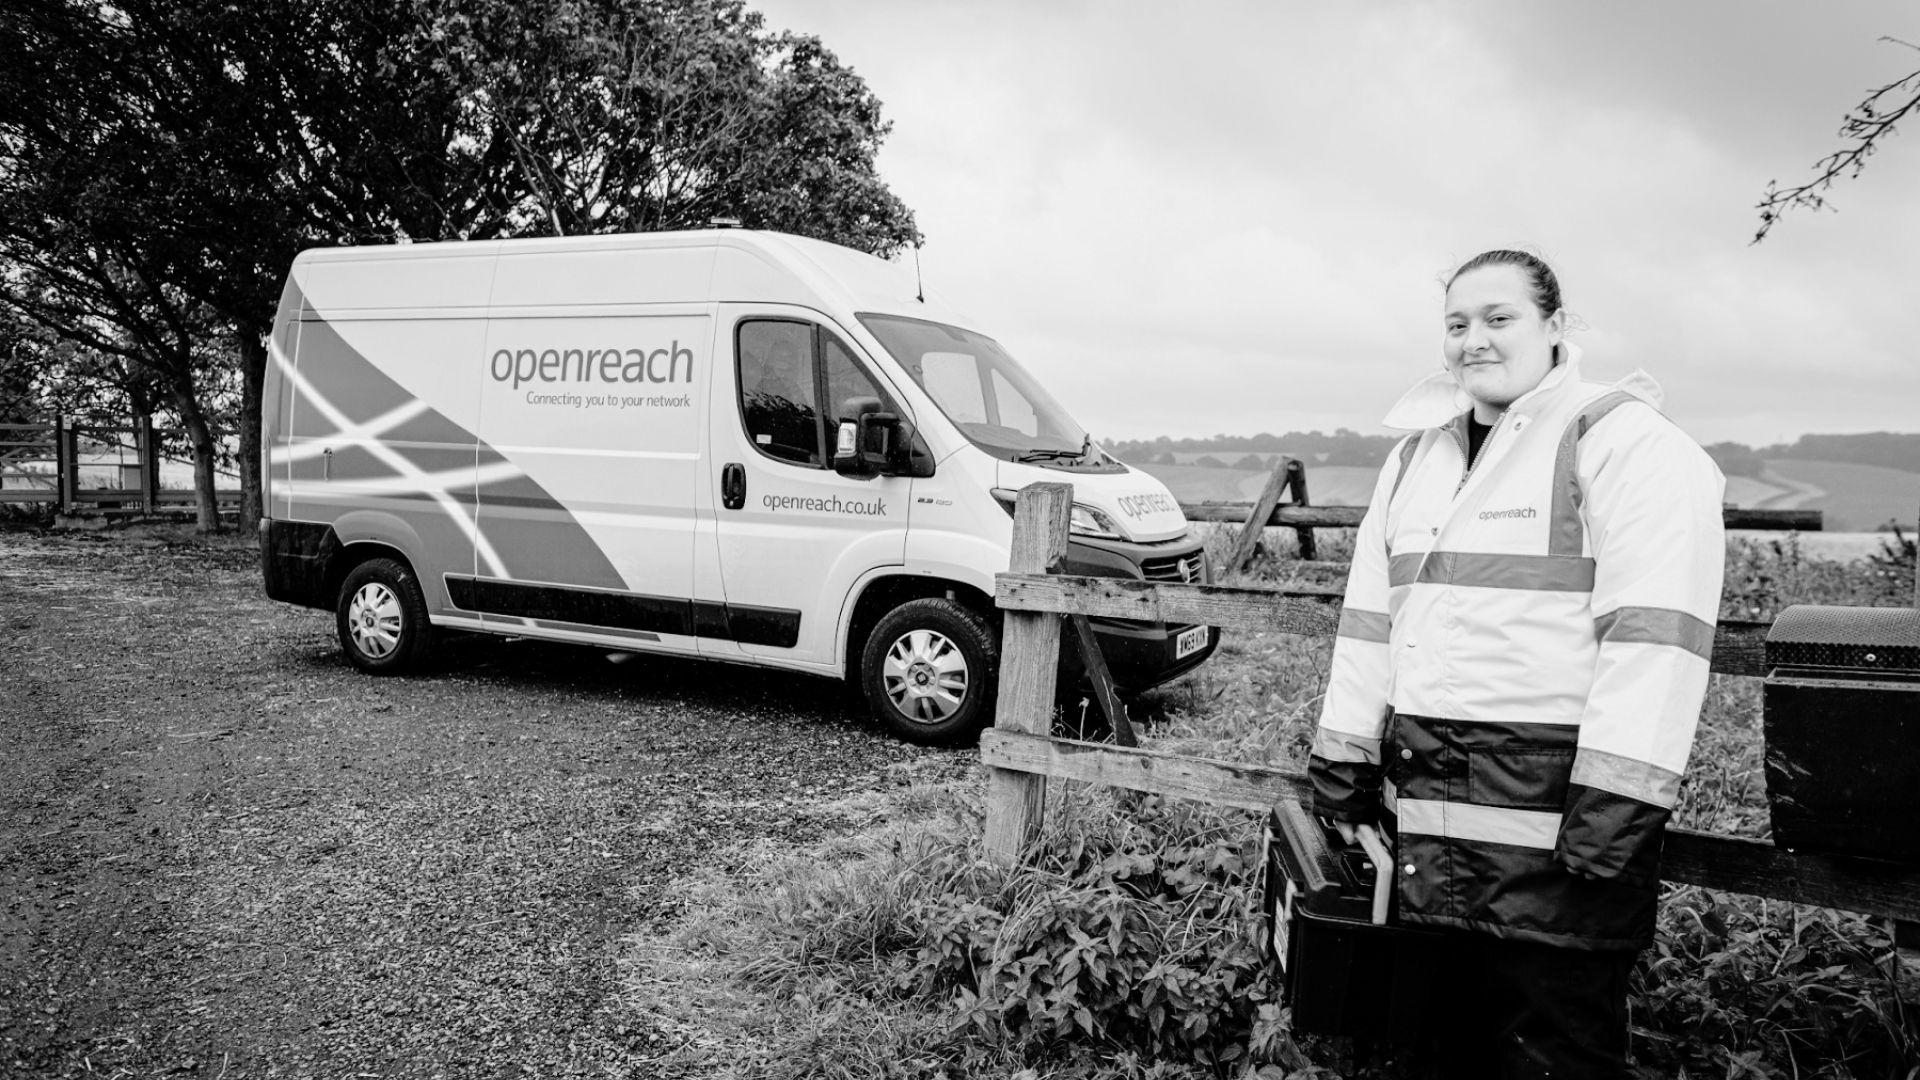 Openreach’s Ultrafast Broadband Opportunity Beckons for Tregynon, Llanbrynmair & Kerry Residents in Powys